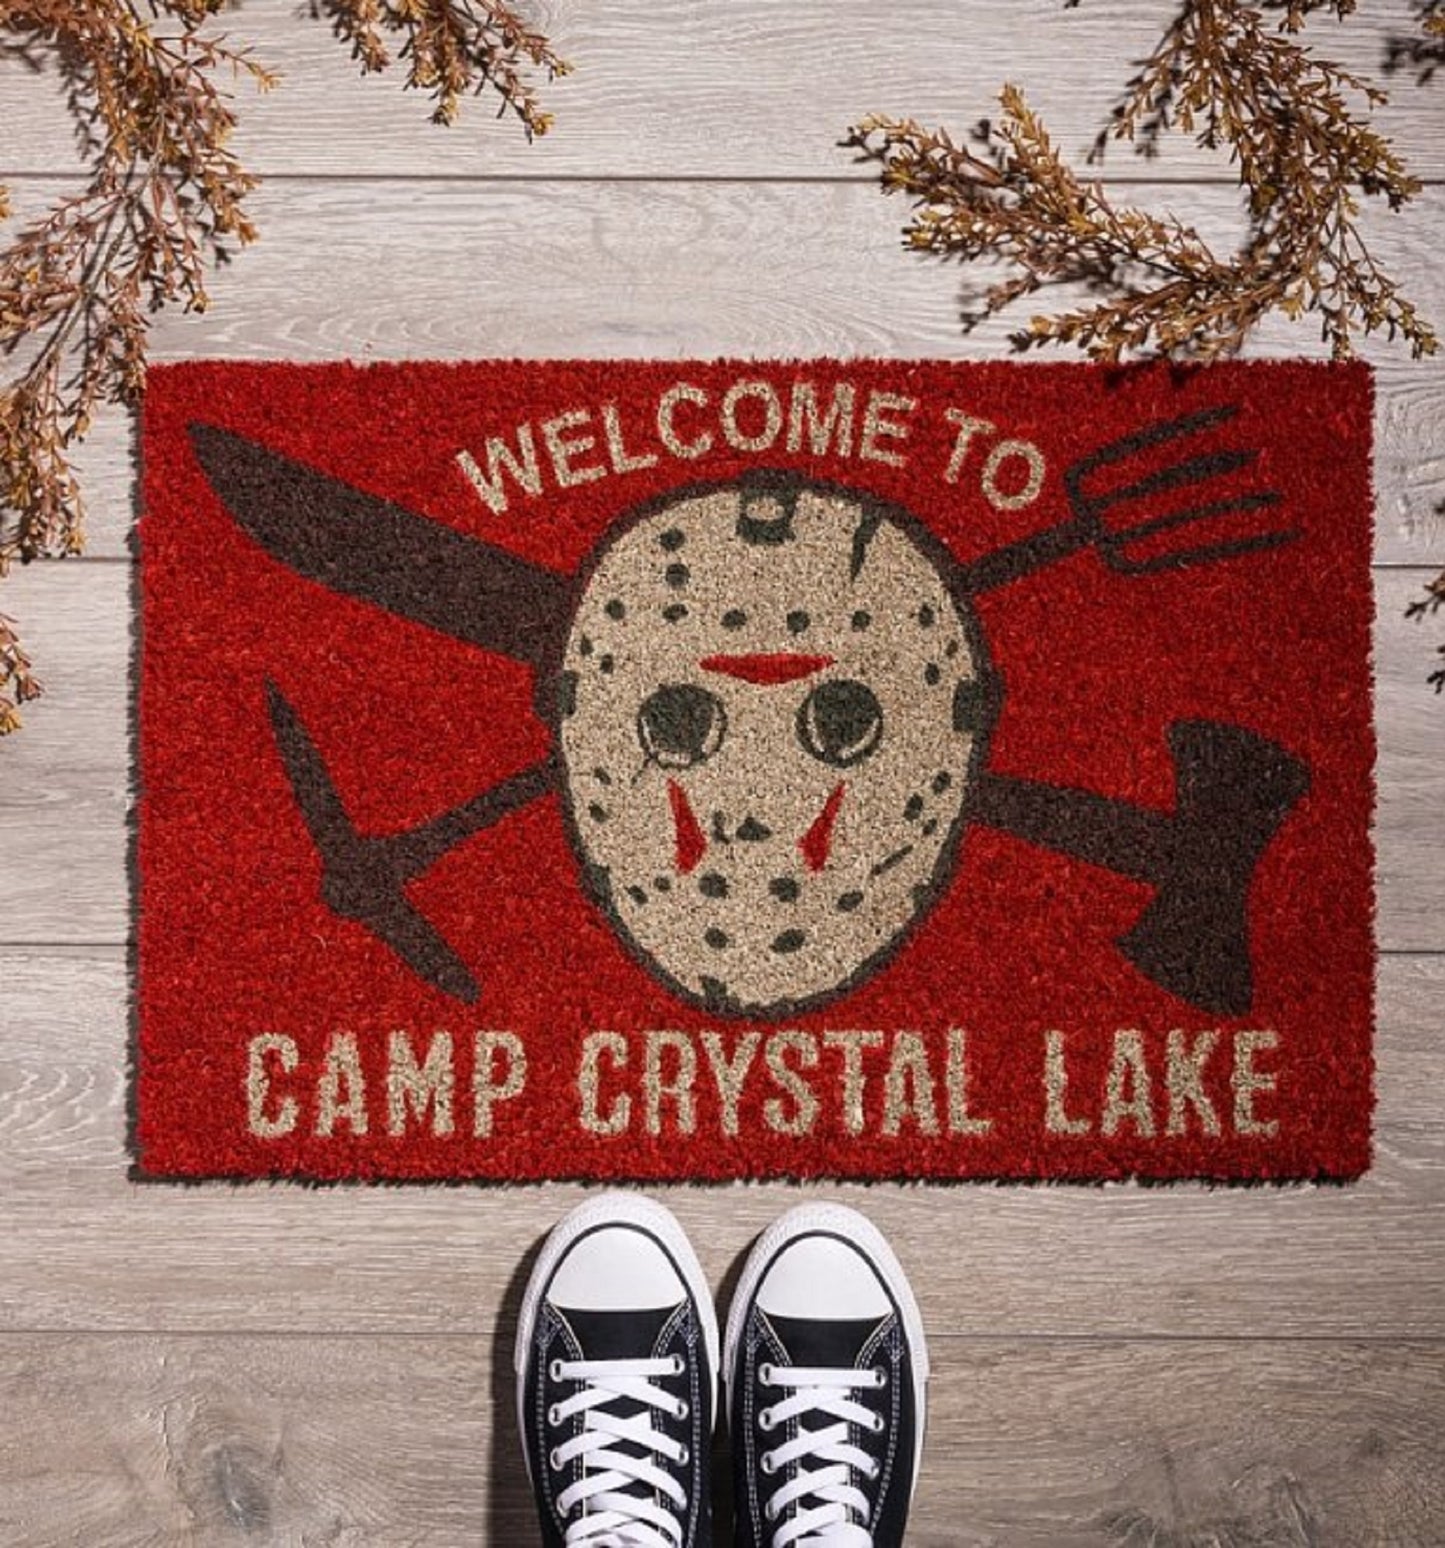 Friday The 13th (Camp Crystal)